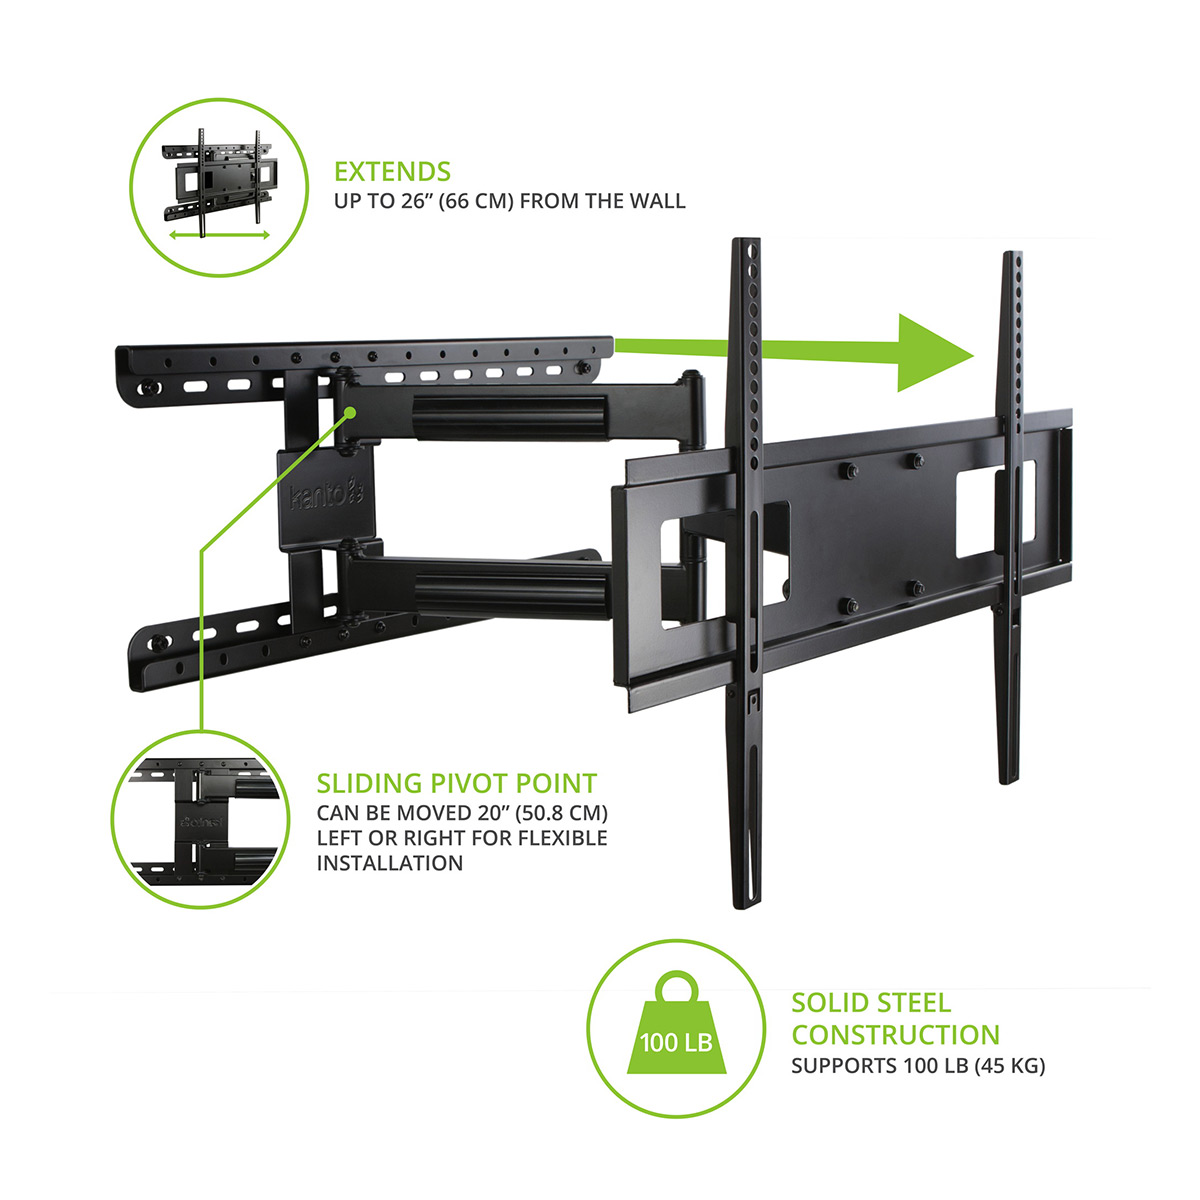 Kanto FMC4 Full Motion Mount with Adjustable Pivot Point for 30" to 60" TVs - image 4 of 12